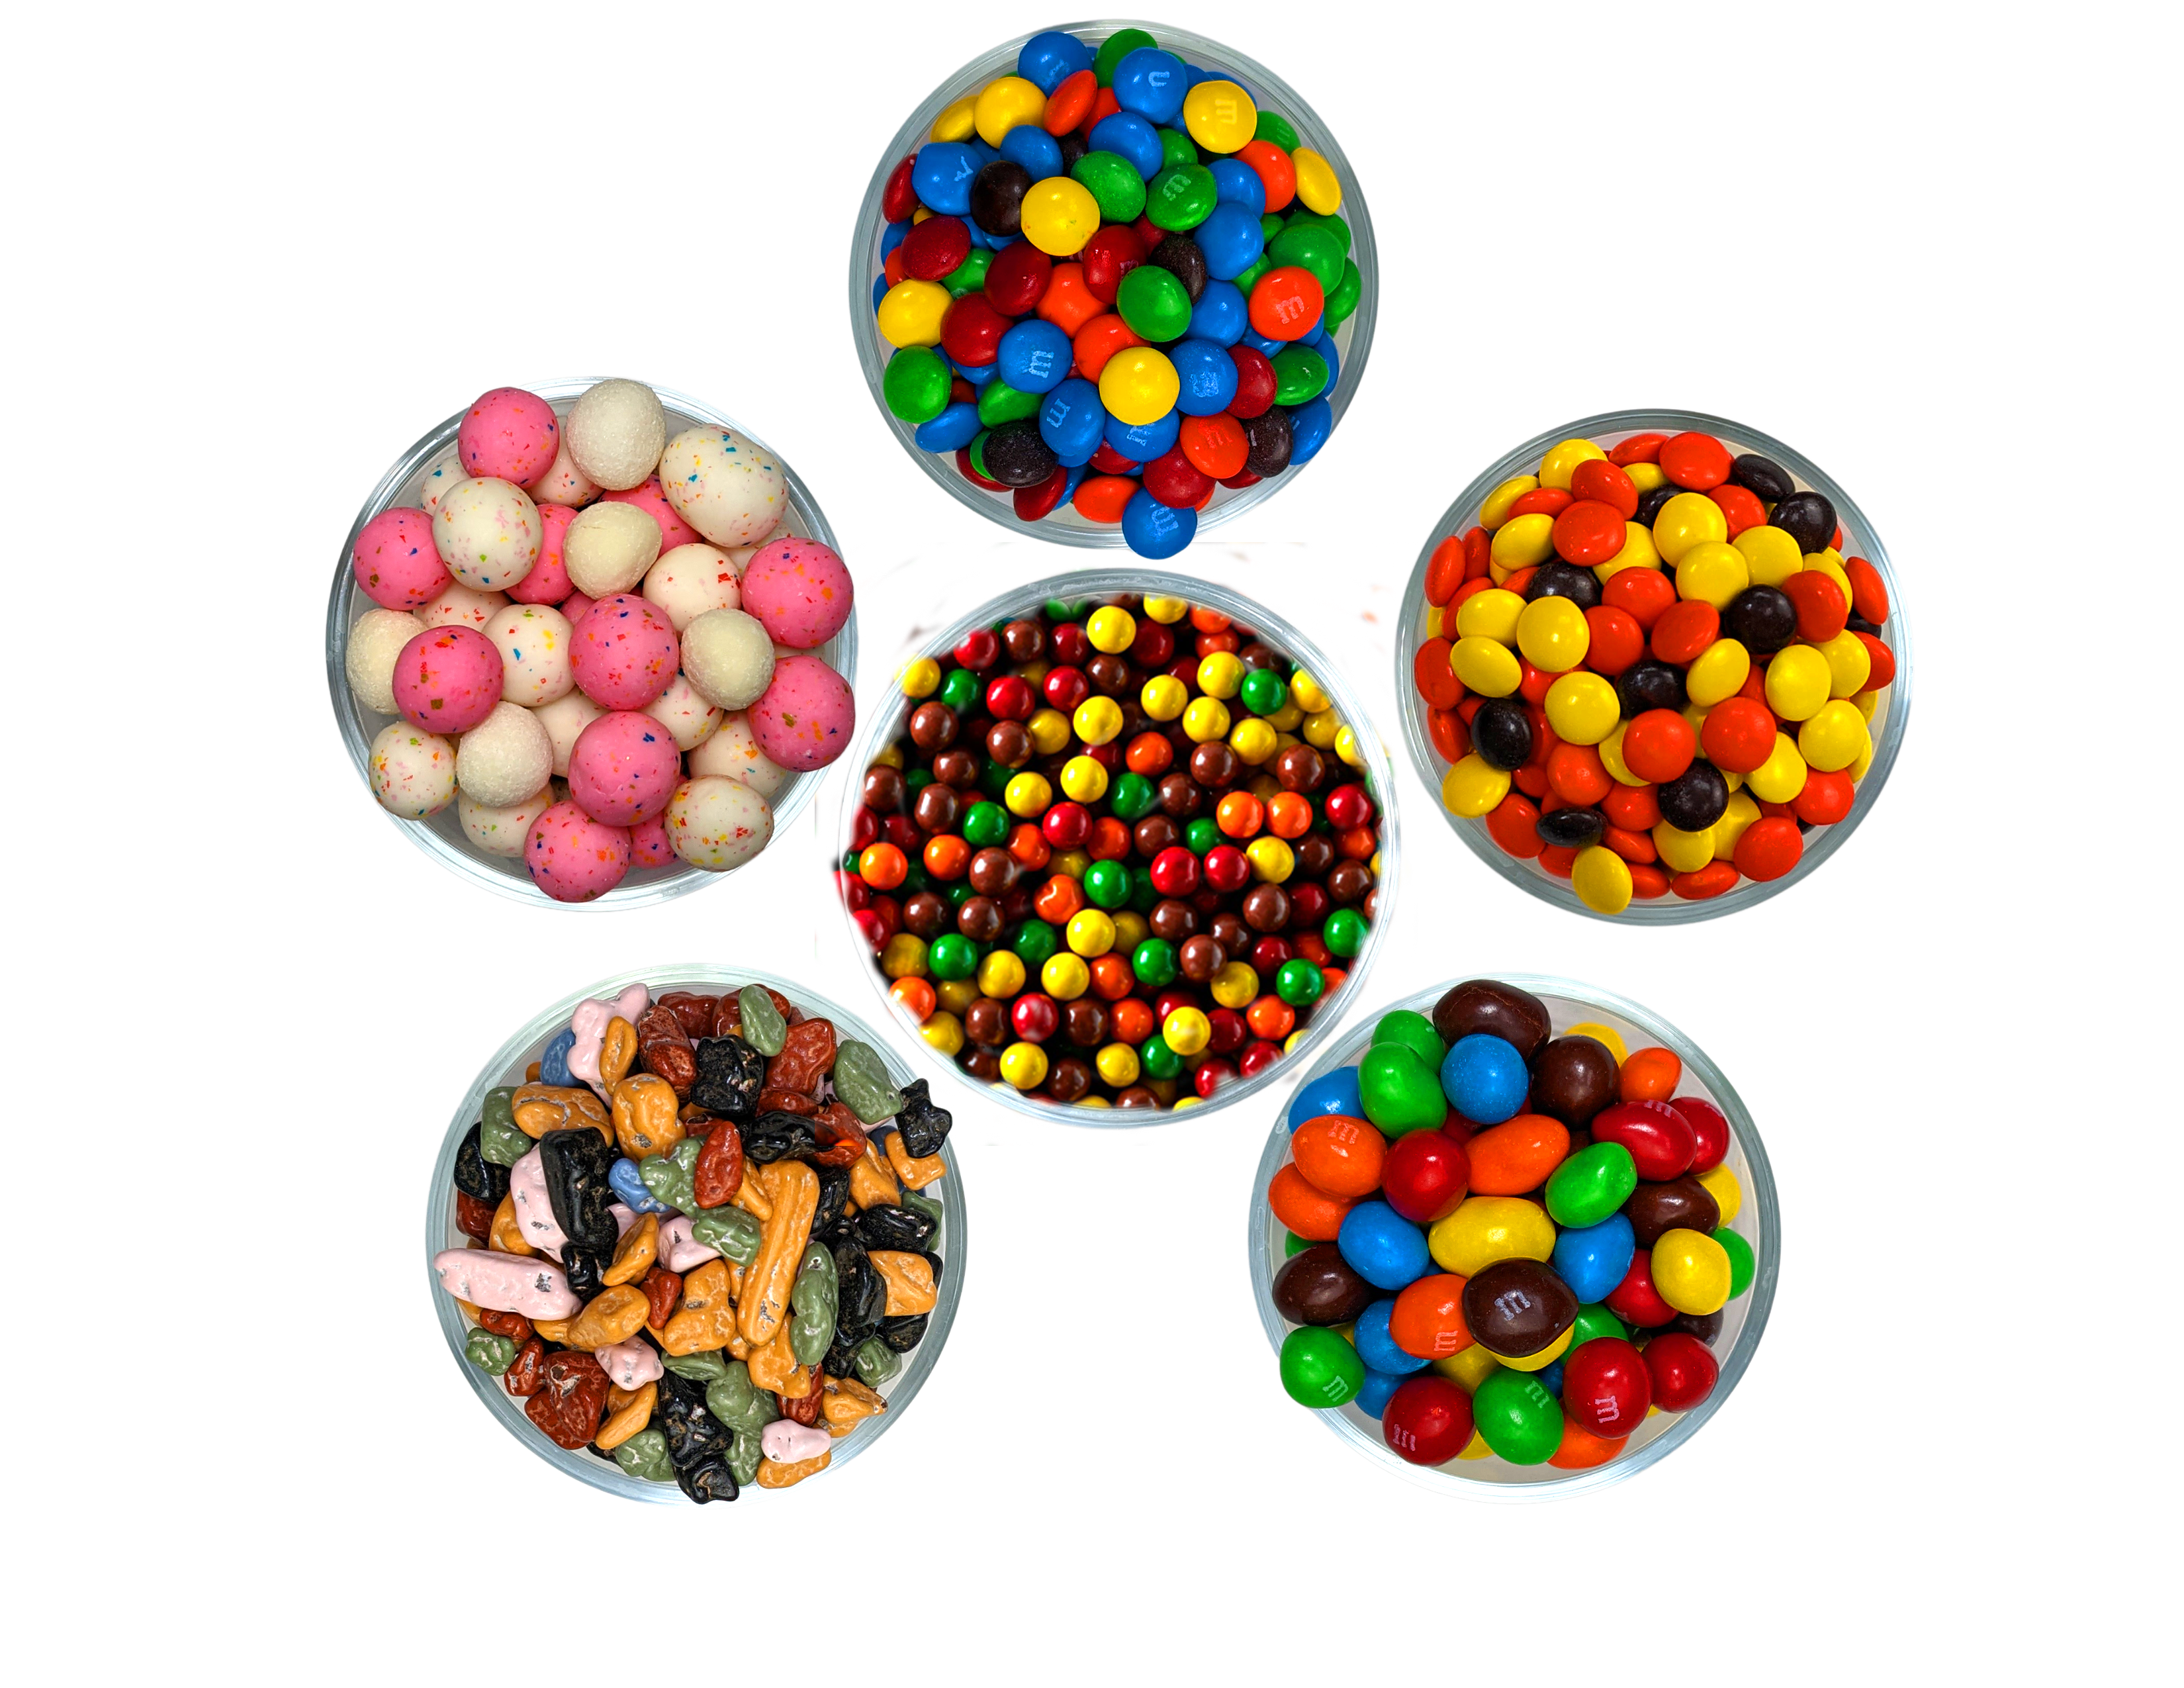 Corporate gifts | corporate gifting | branded corporate gifts | custom gifts | Chocolate Rocks | Peanut M&Ms | Sixlets | Candy Malt Balls | Reeses Pieces | Plain M&Ms